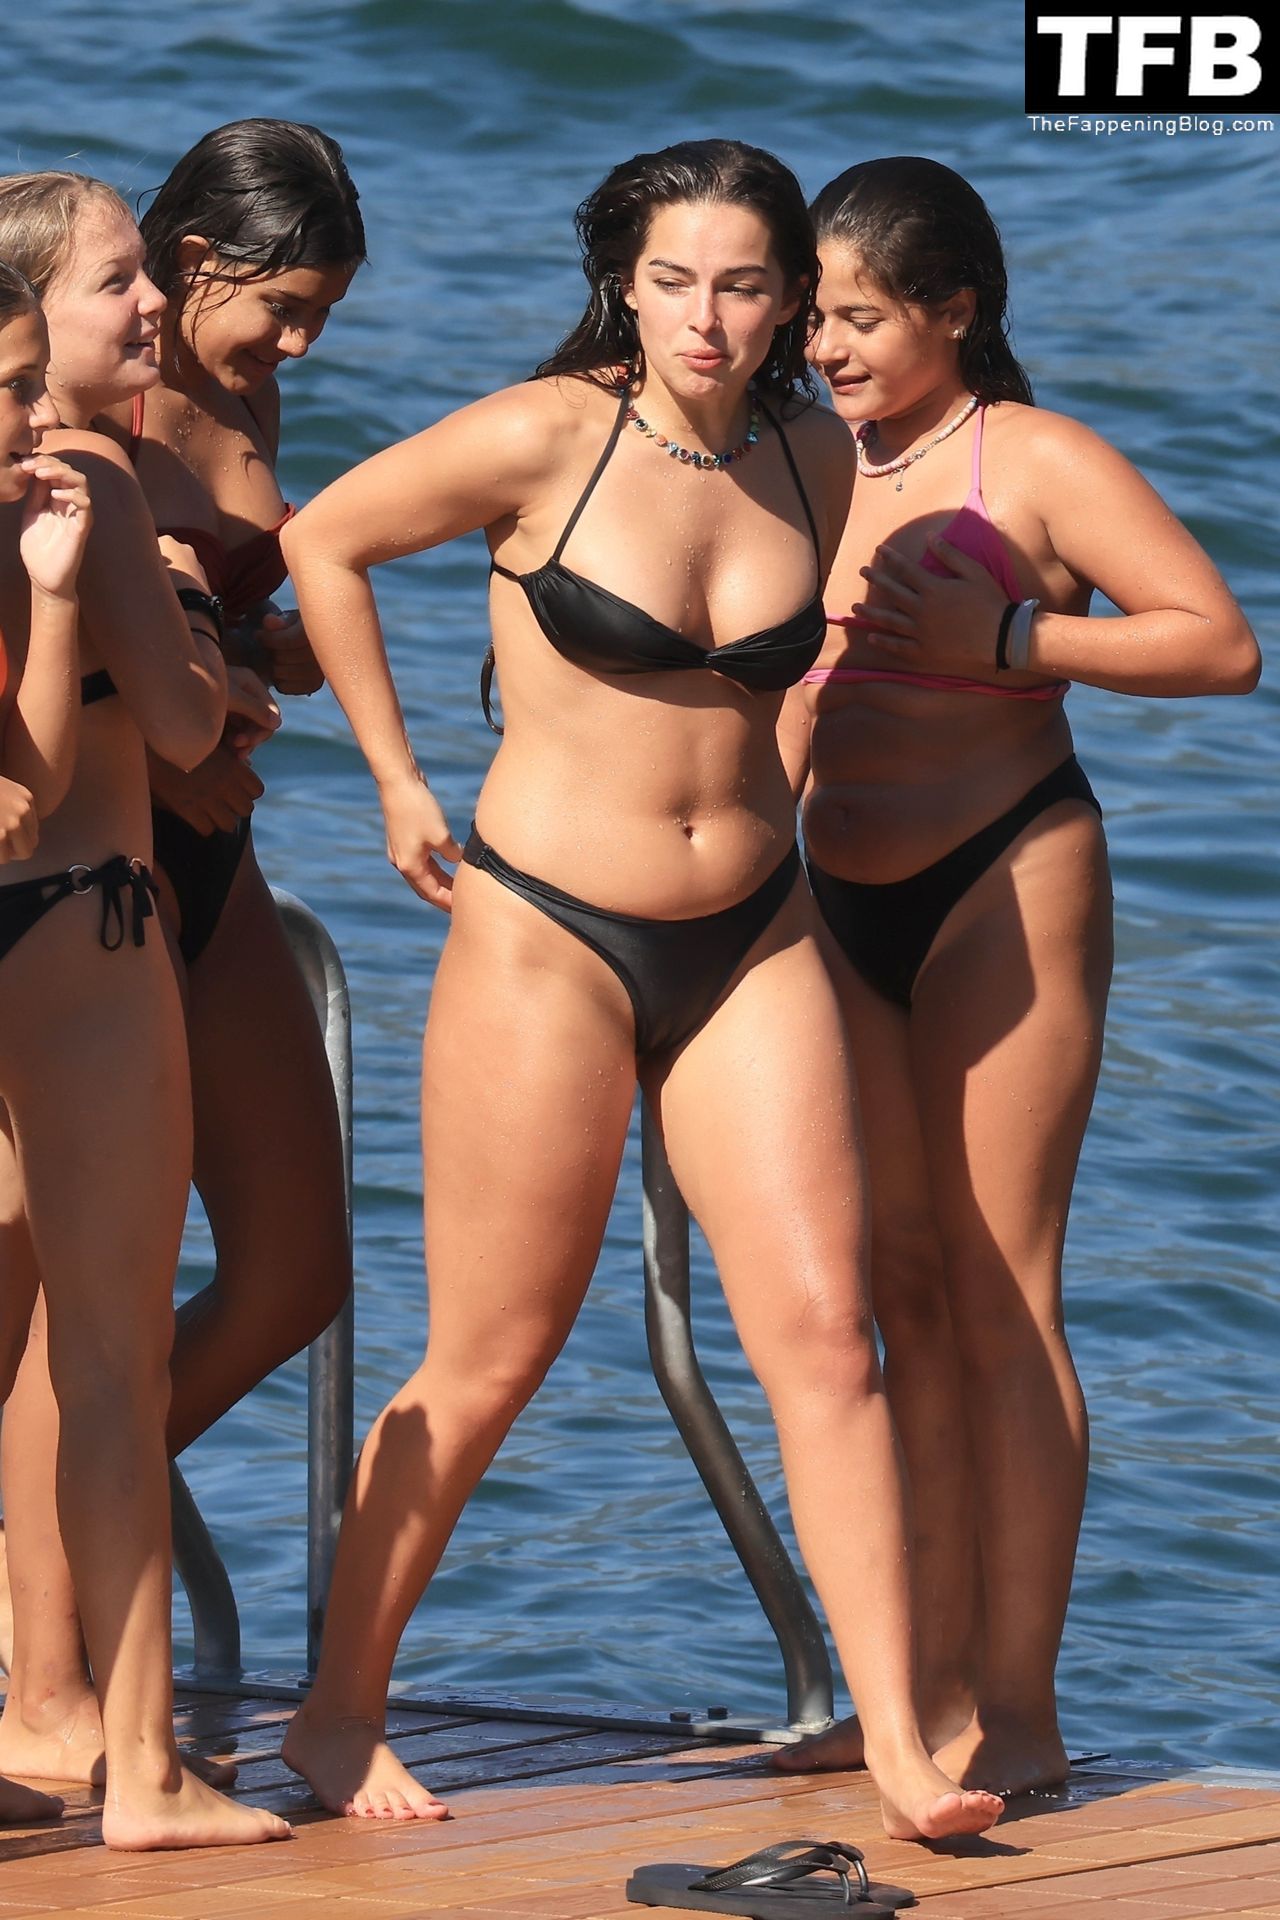 Addison Rae Sexy The Fappening Blog 39 - Addison Rae Displays Her Curves in a Black Bikini on Holiday with Omer Fedi on Lake Como (70 Photos)